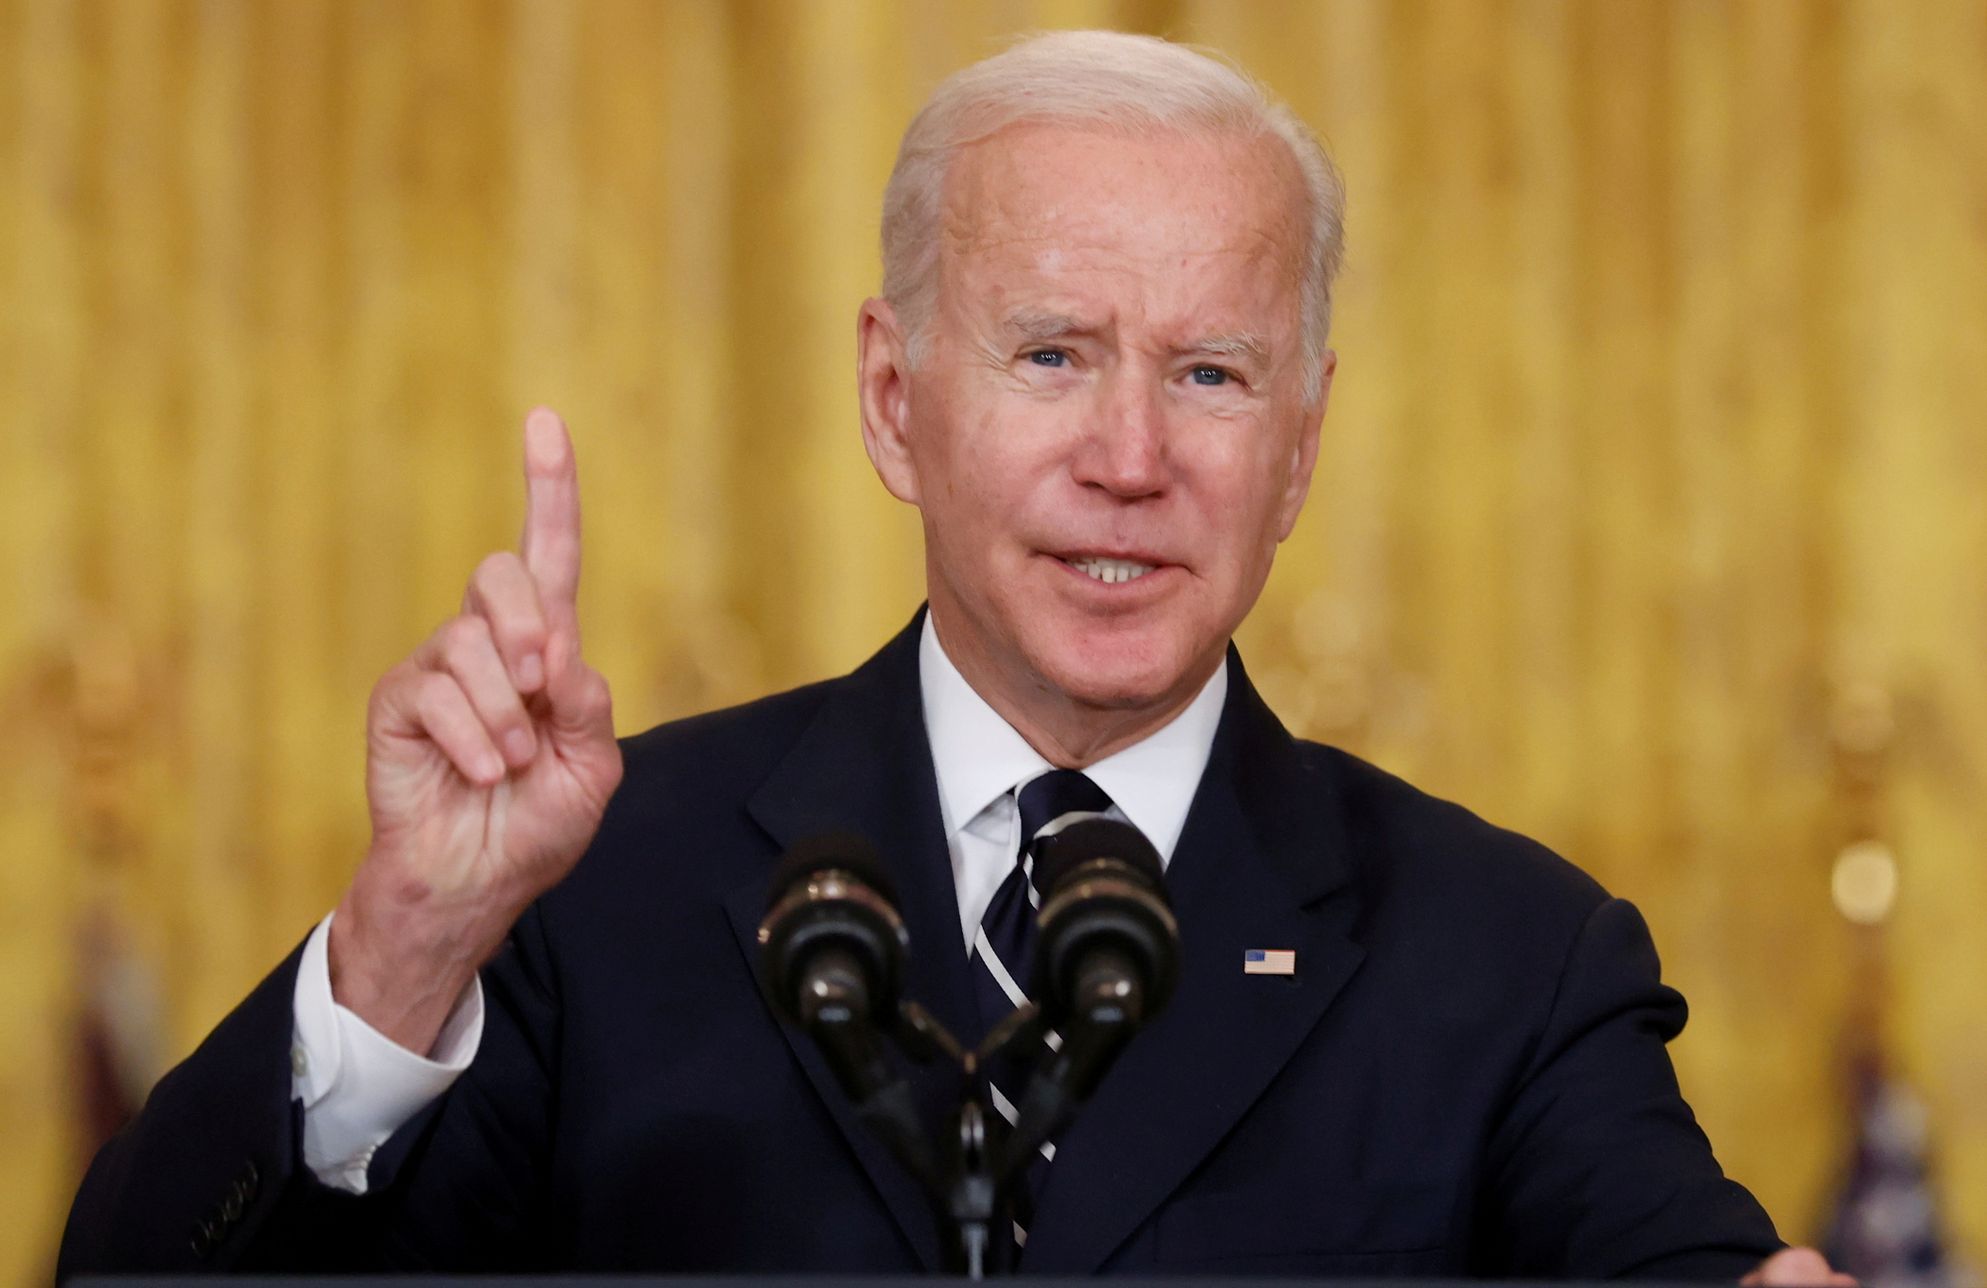 Biden claims to be president in 2024. If his health allows